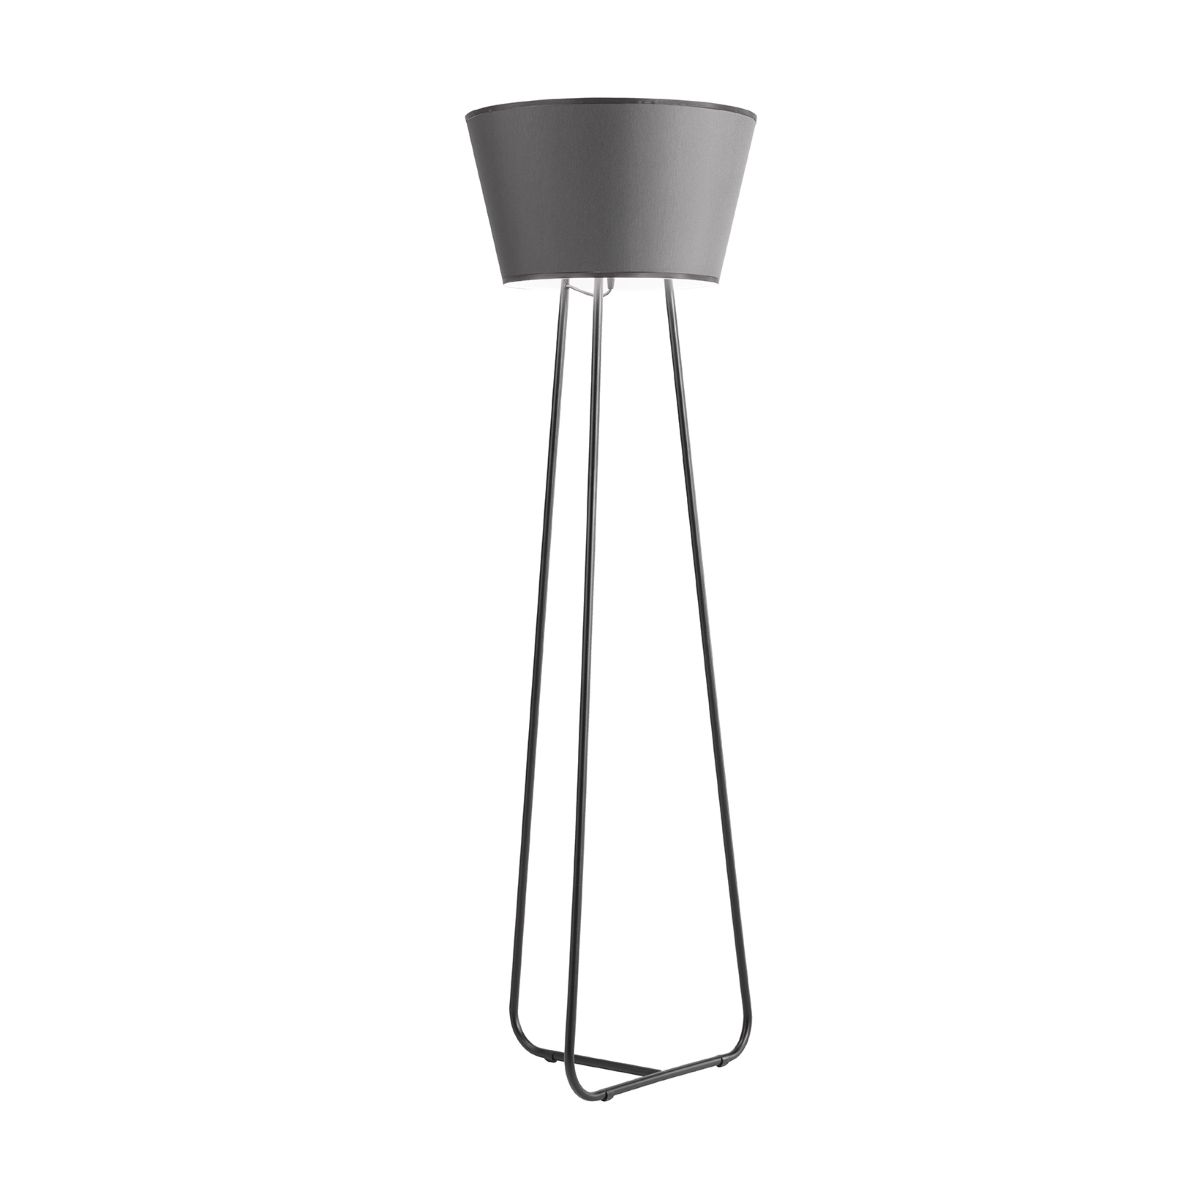 Garconne Floor Lamp In Painted Metal With Circular Shade Anthracite Black  Base Within Black Floor Lamps (View 11 of 15)